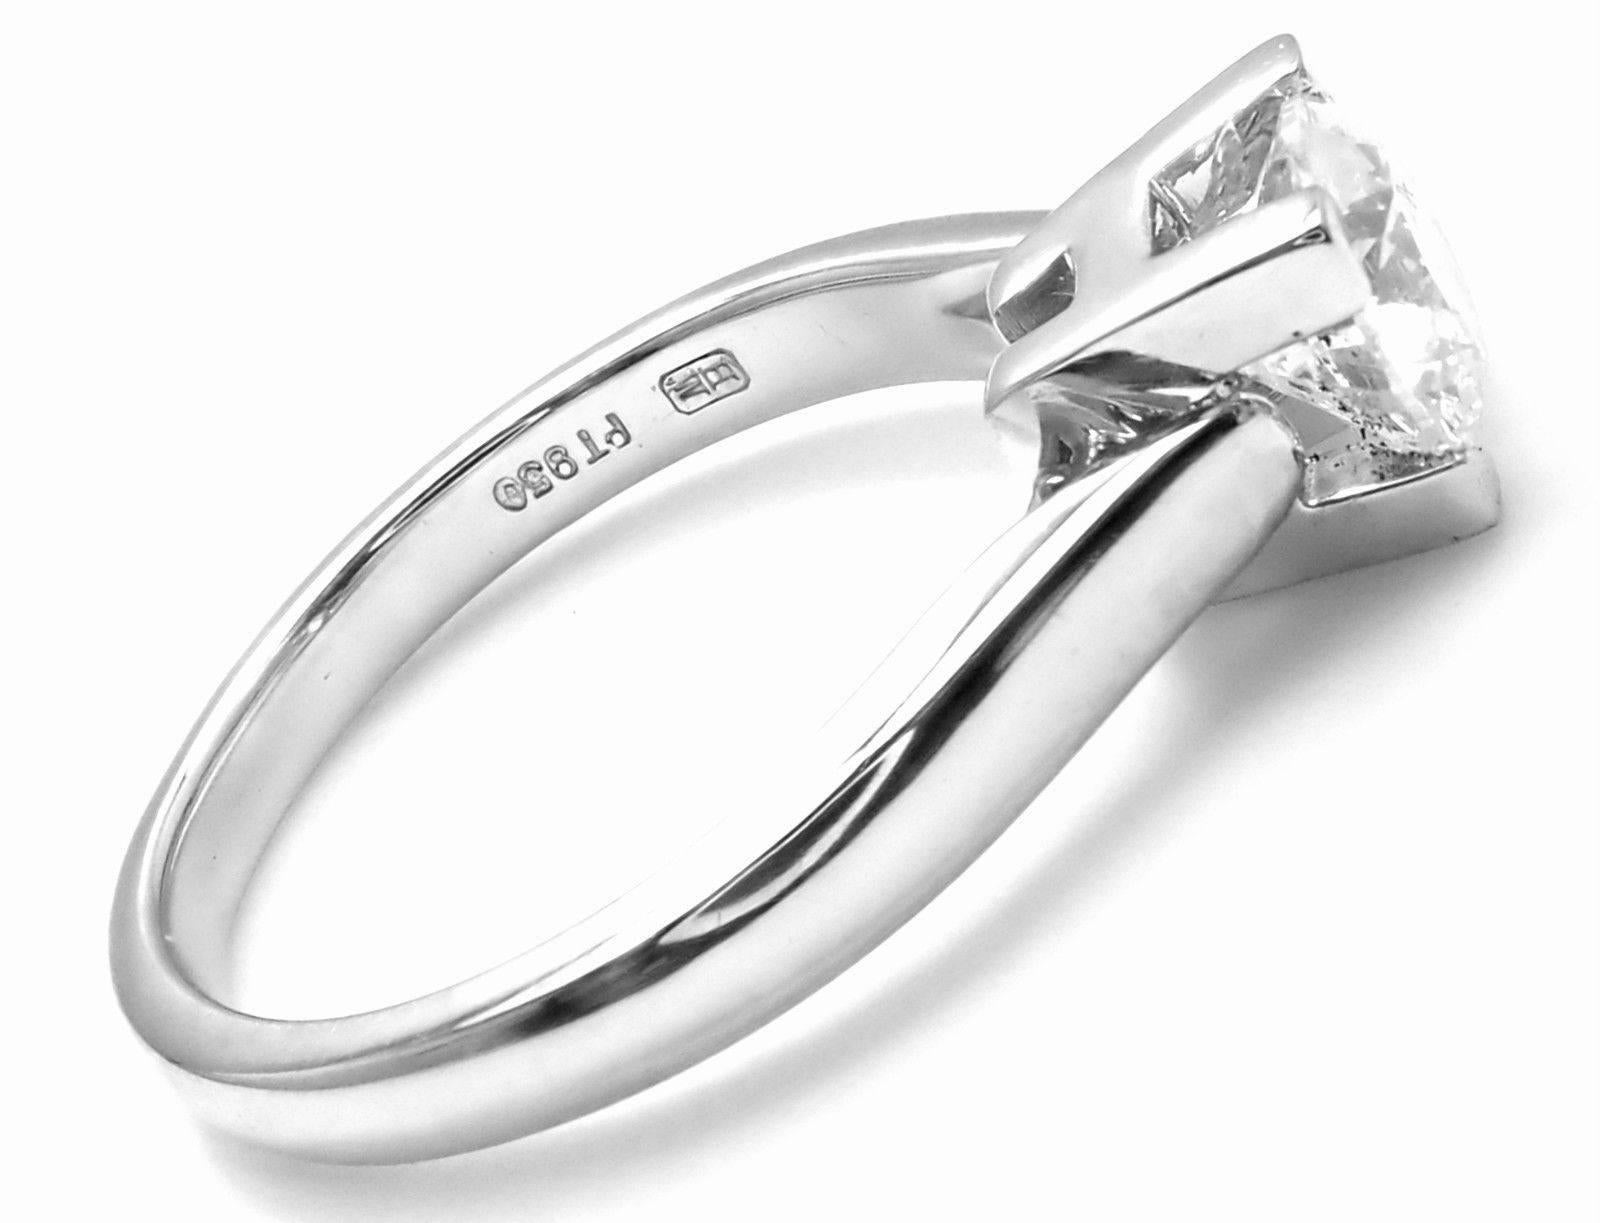 Platinum .71ct Diamond Solitaire Engagement Ring by Harry Winston. 
With 1 round brilliant cut diamonds VVS2 clarity, F color total weight approx. .71ct
Cut Excellent
Polish Very Good
Symmetry Very Good
Fluorescence None
This ring comes with GIA